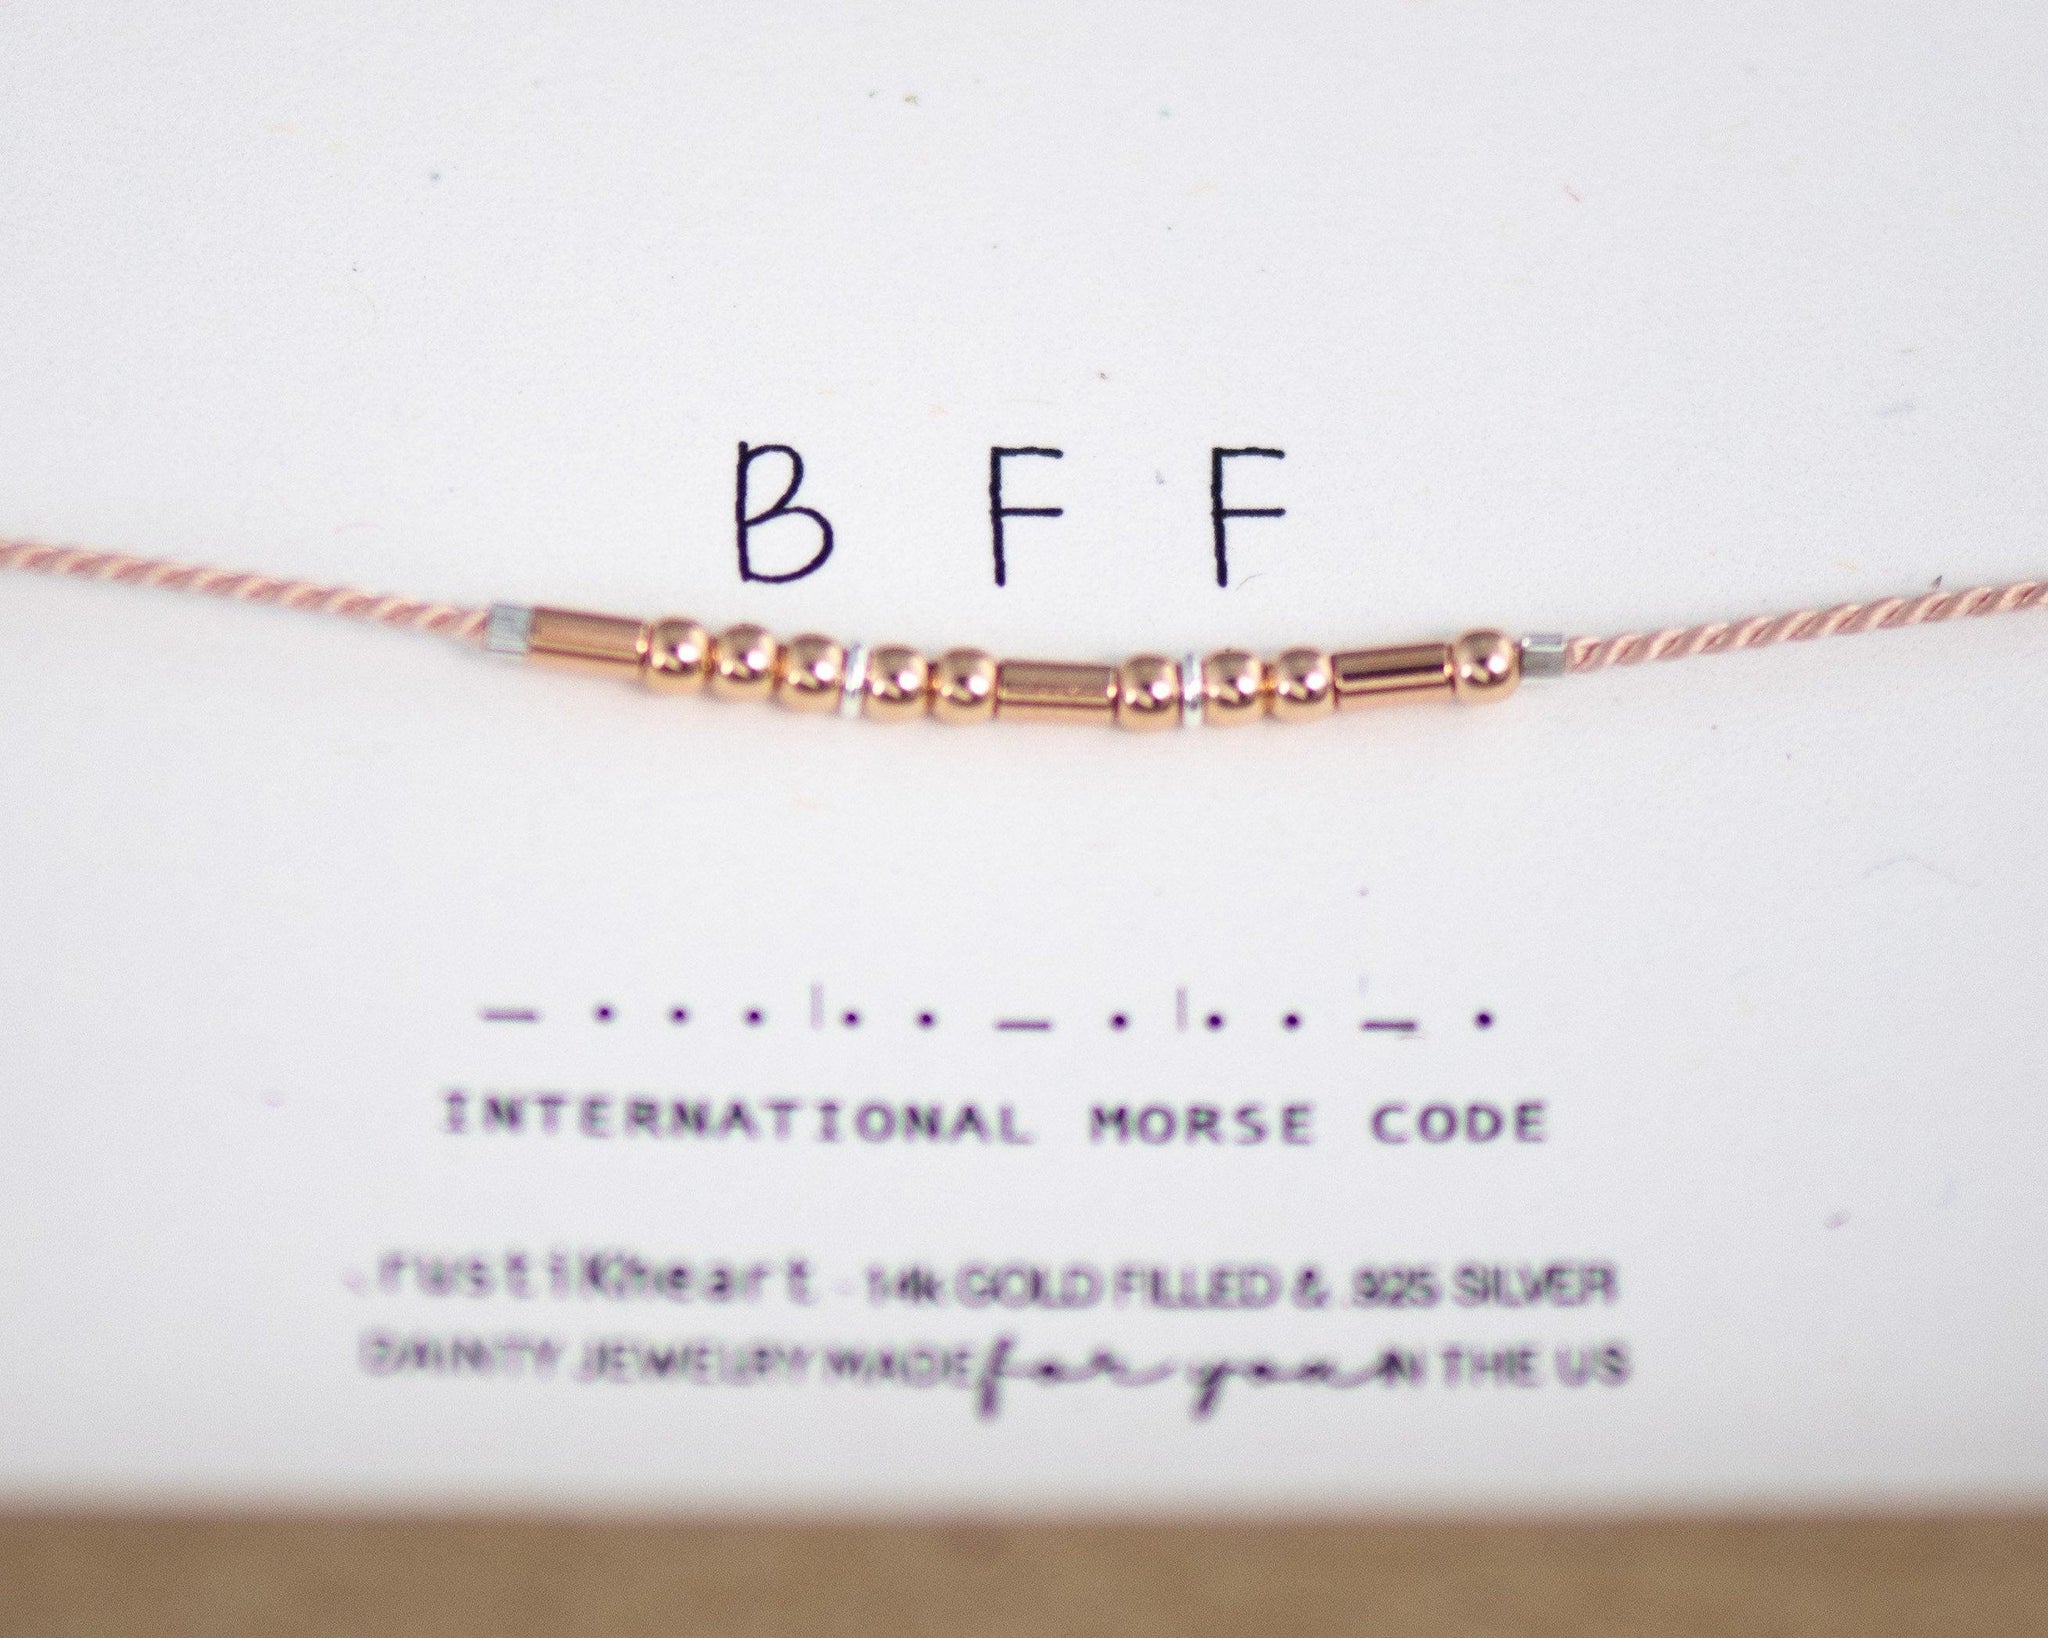 BFF Morse Code Bracelet • AX.RS.RT.S2 - Morse and Dainty